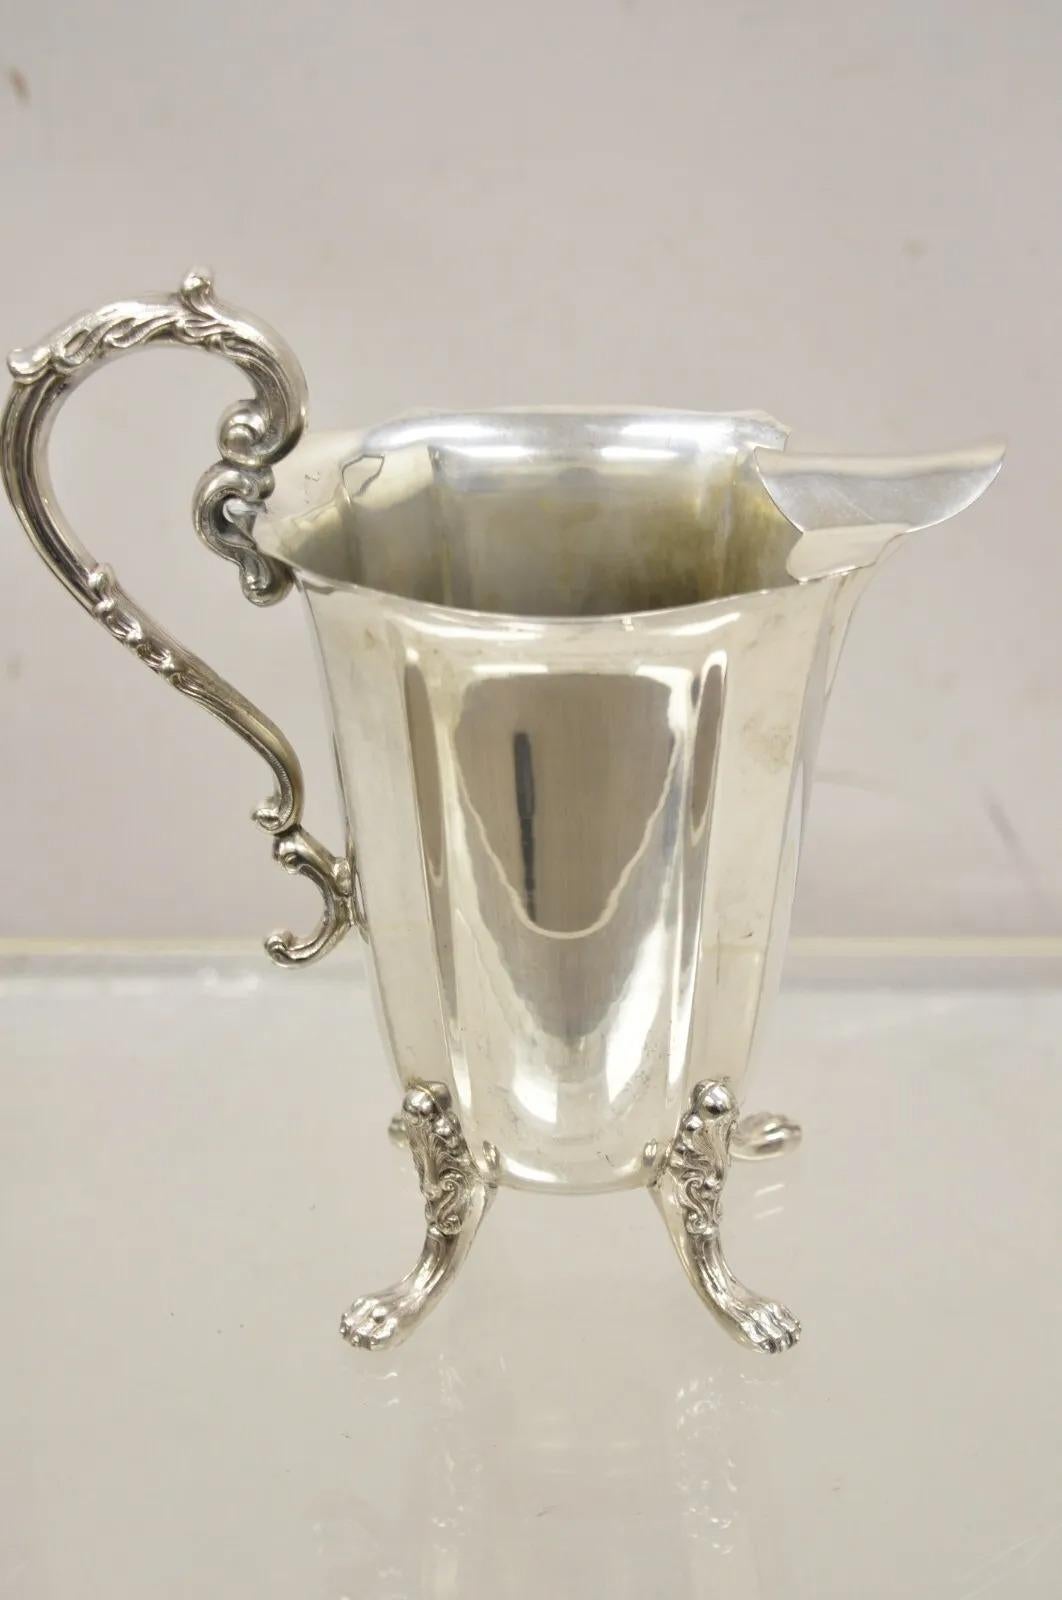 Vintage Victorian Silver Plated Fluted Paw Feet Footed Water Beverage Pitcher. Circa Early to Mid 20th Century. Measurements:  10.5